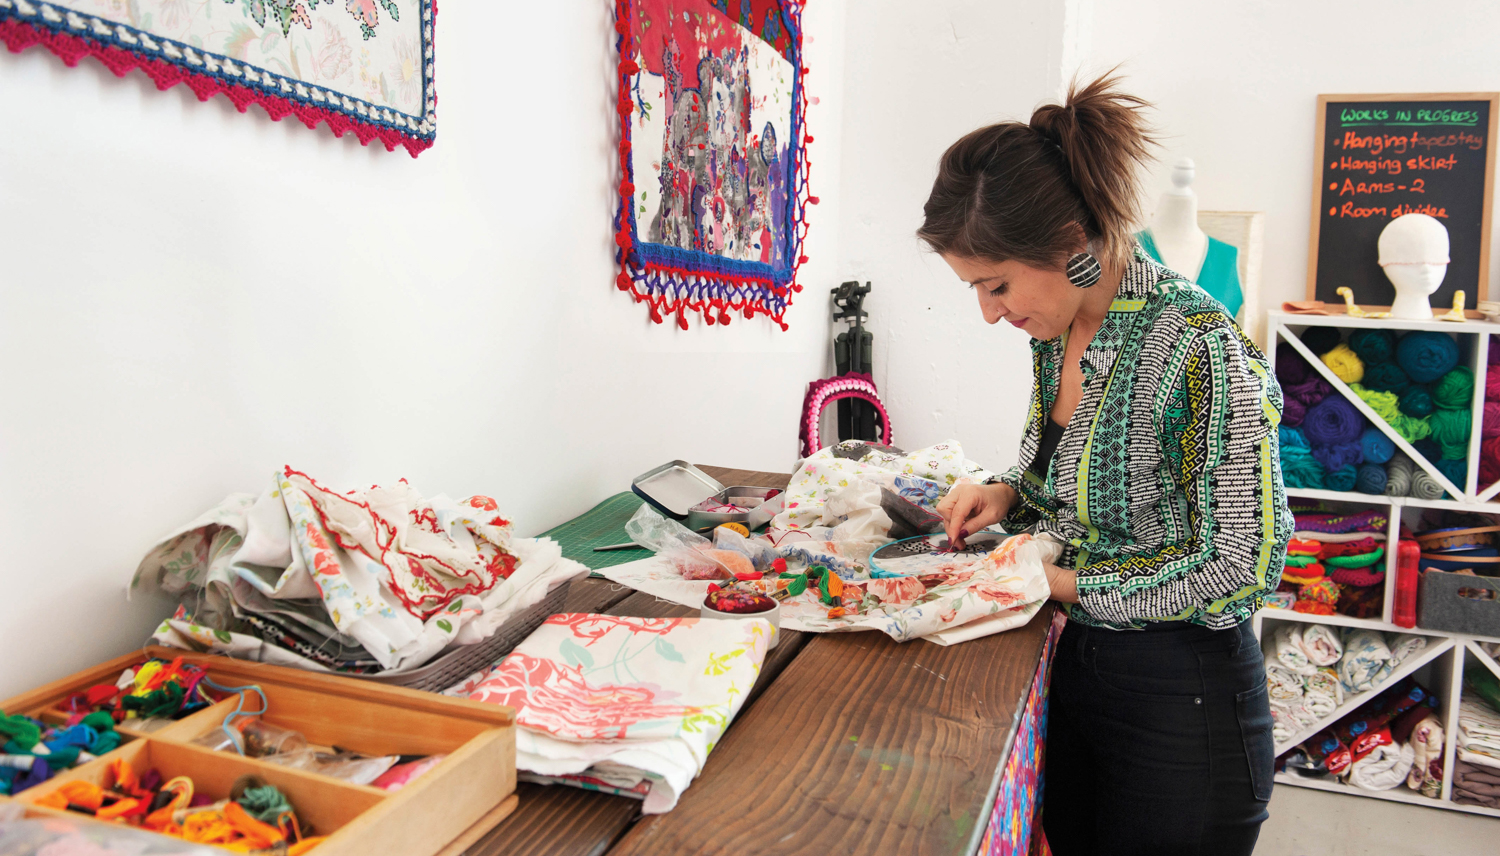 Hale Ekinci embroidering in an art studio filled with yarn and materials